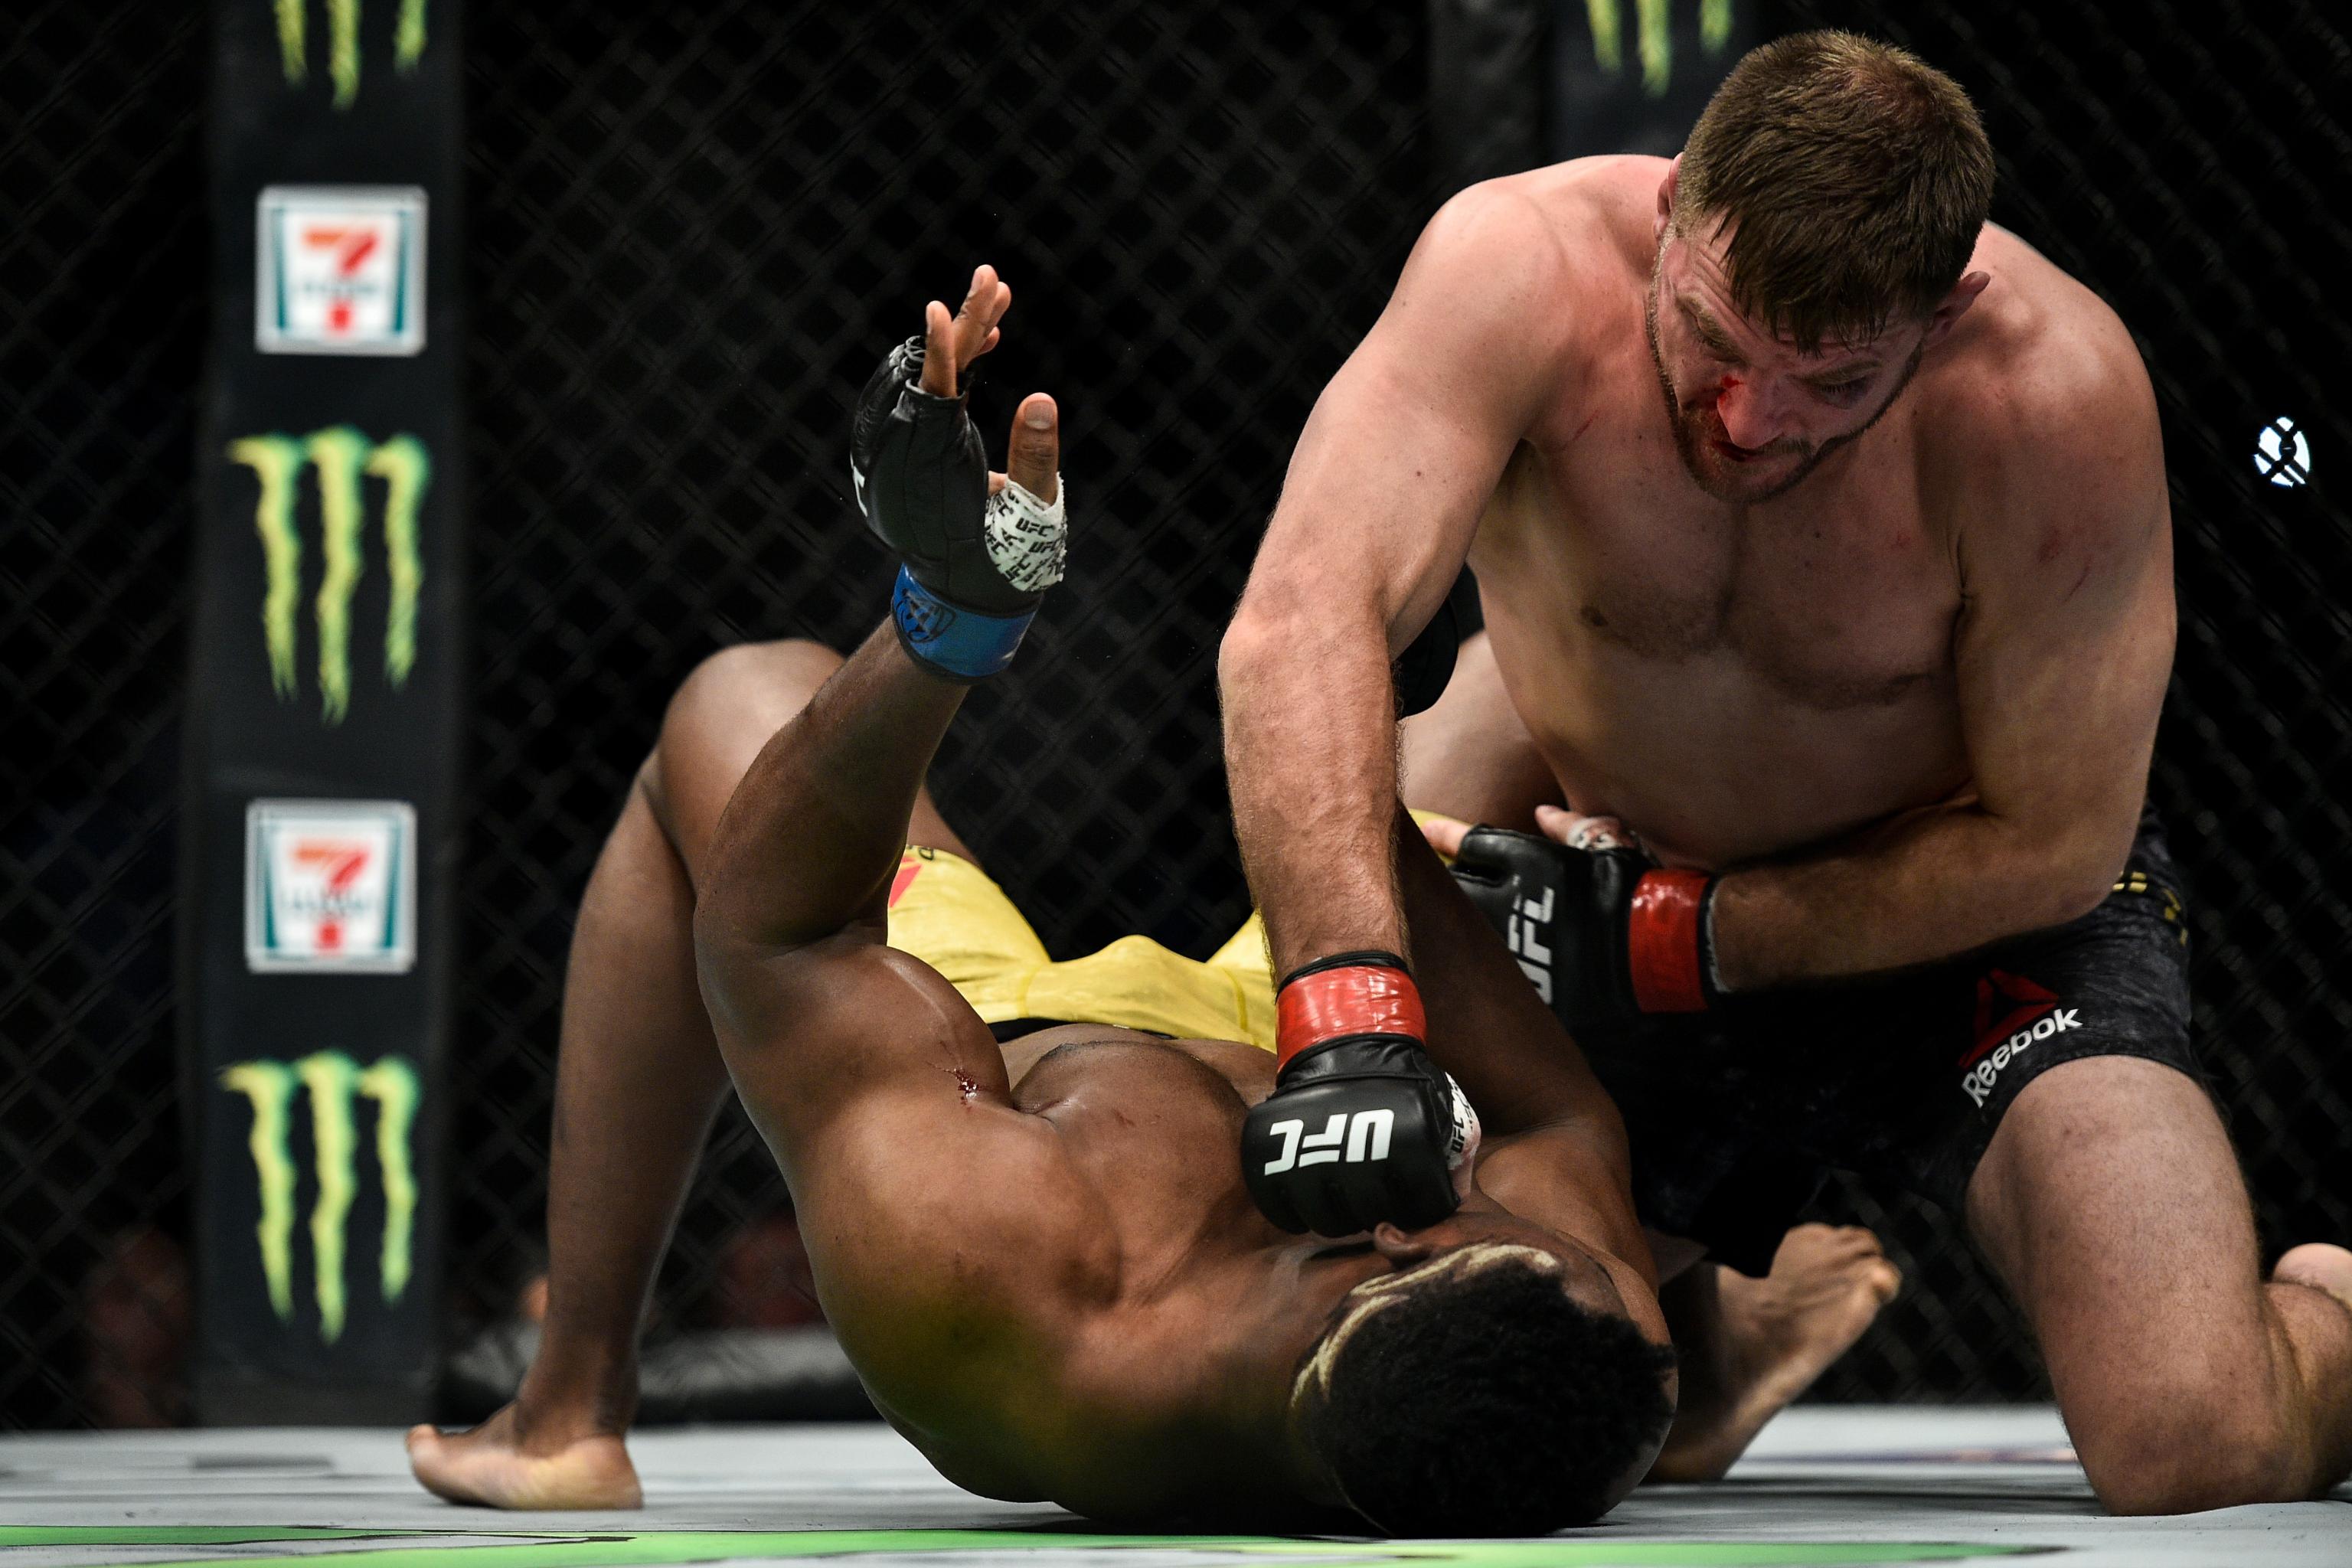 UFC 220 Results: Stipe Miocic Earns Big Decision Win over Francis Ngannou | Bleacher Report | Latest News, Videos and Highlights